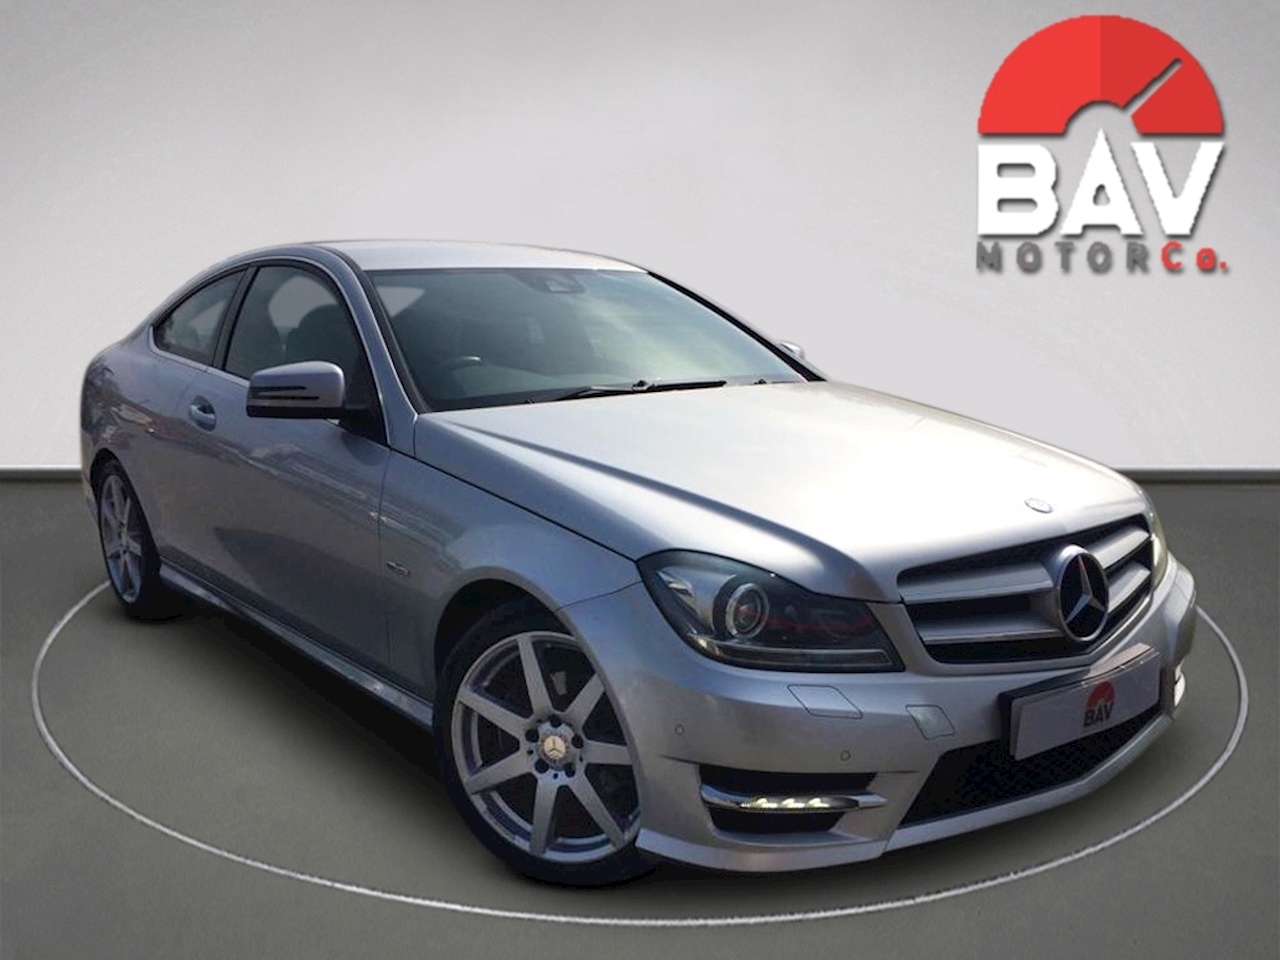 C Class 2.1 C250 CDI BlueEfficiency AMG Sport Edition 125 Coupe 2dr Diesel 7G-Tronic (139 g/km, 201 bhp)